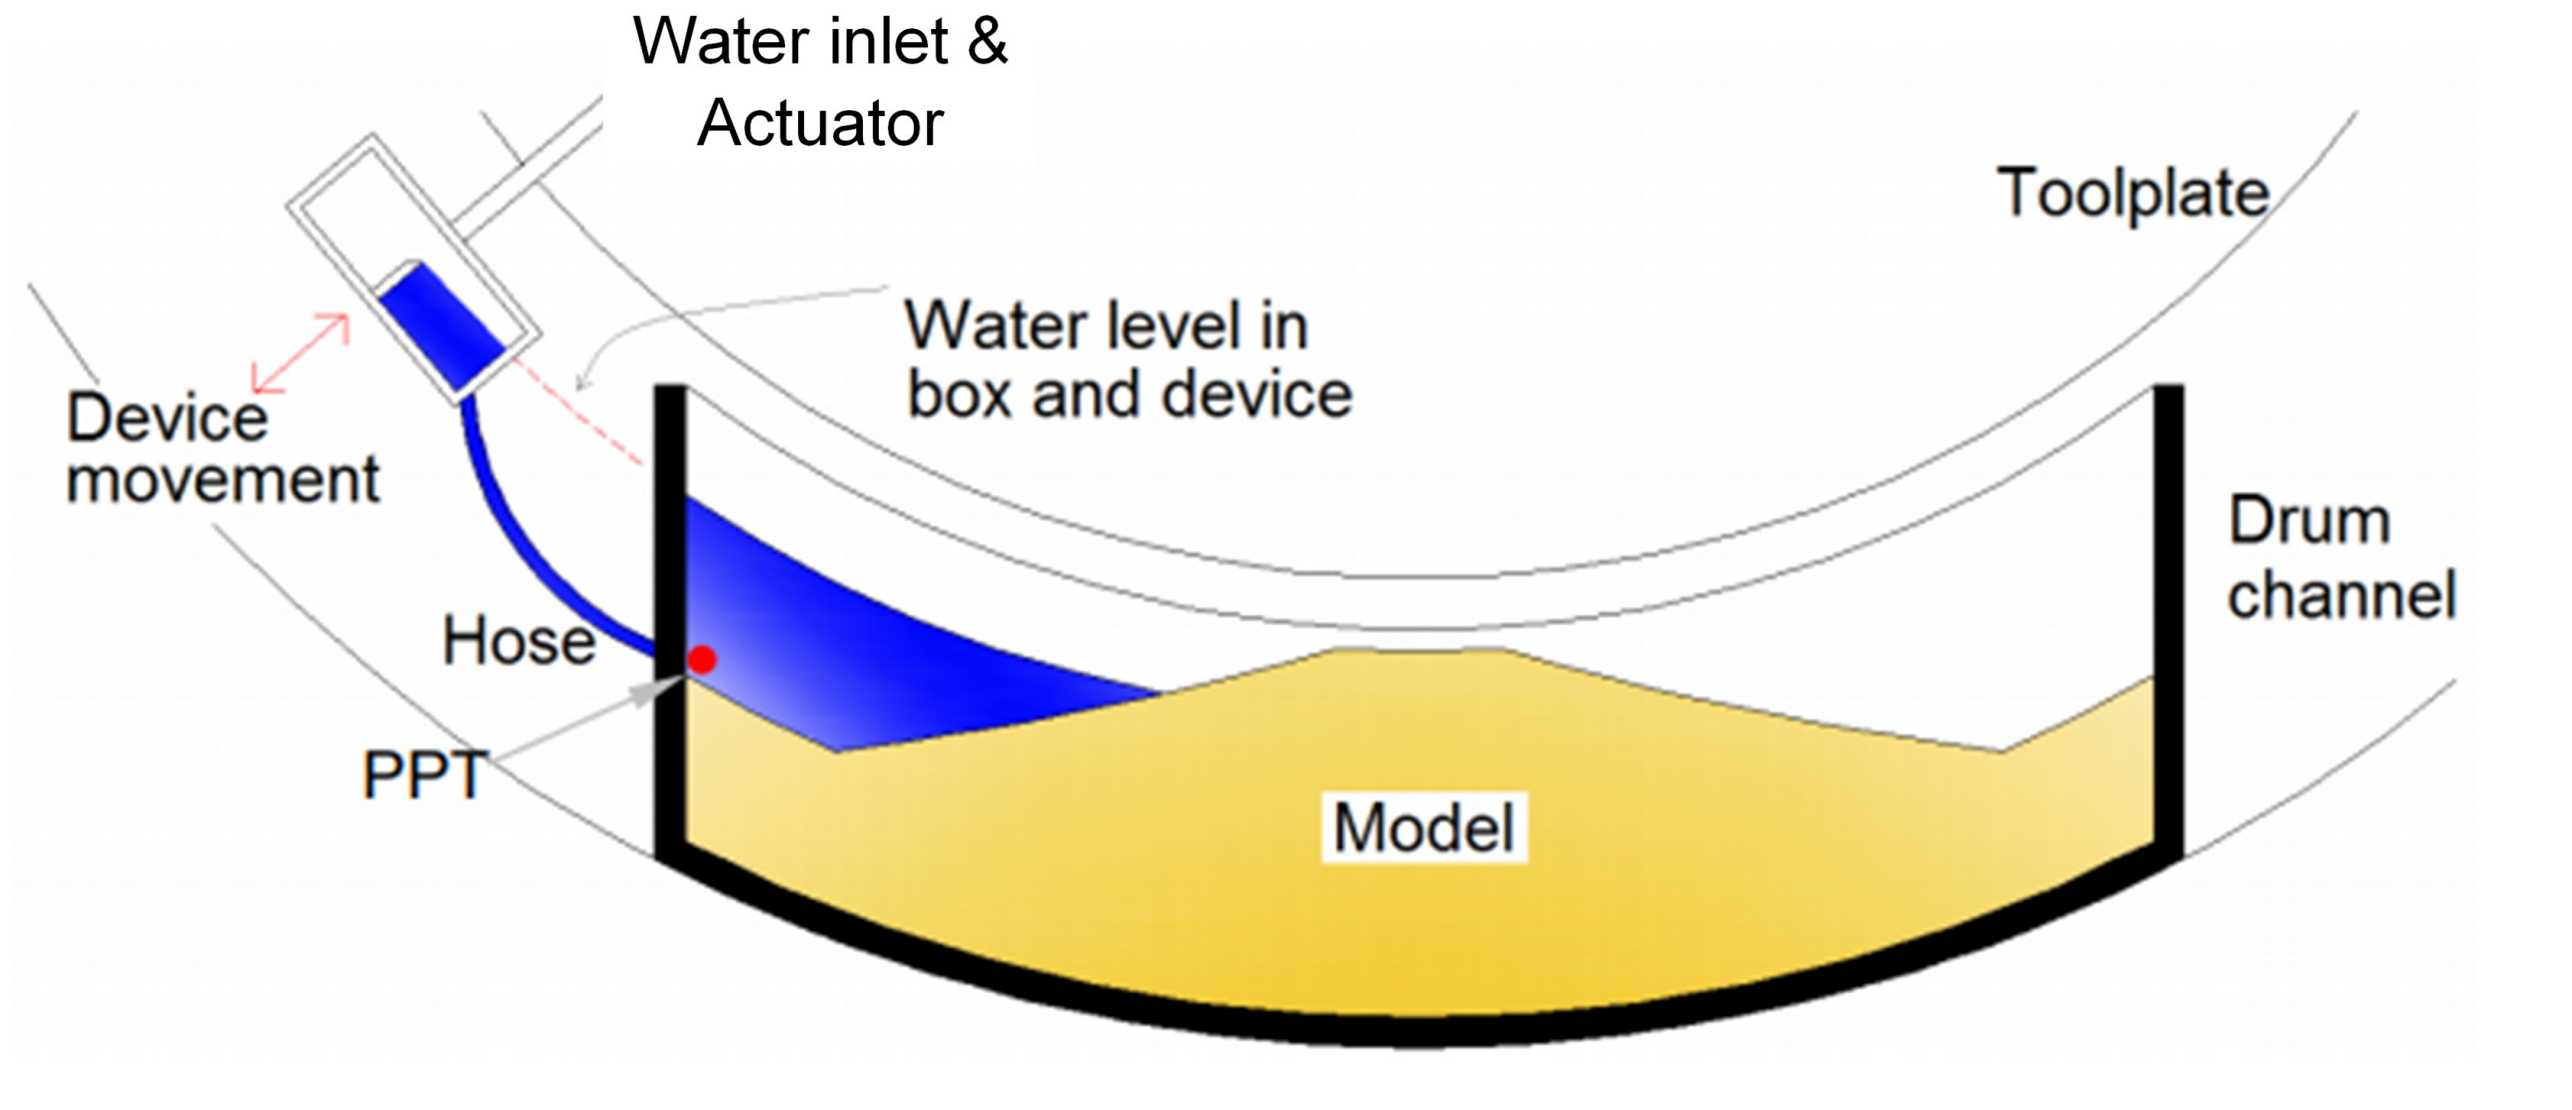 Schematic of the water level control system (Morales 2014).